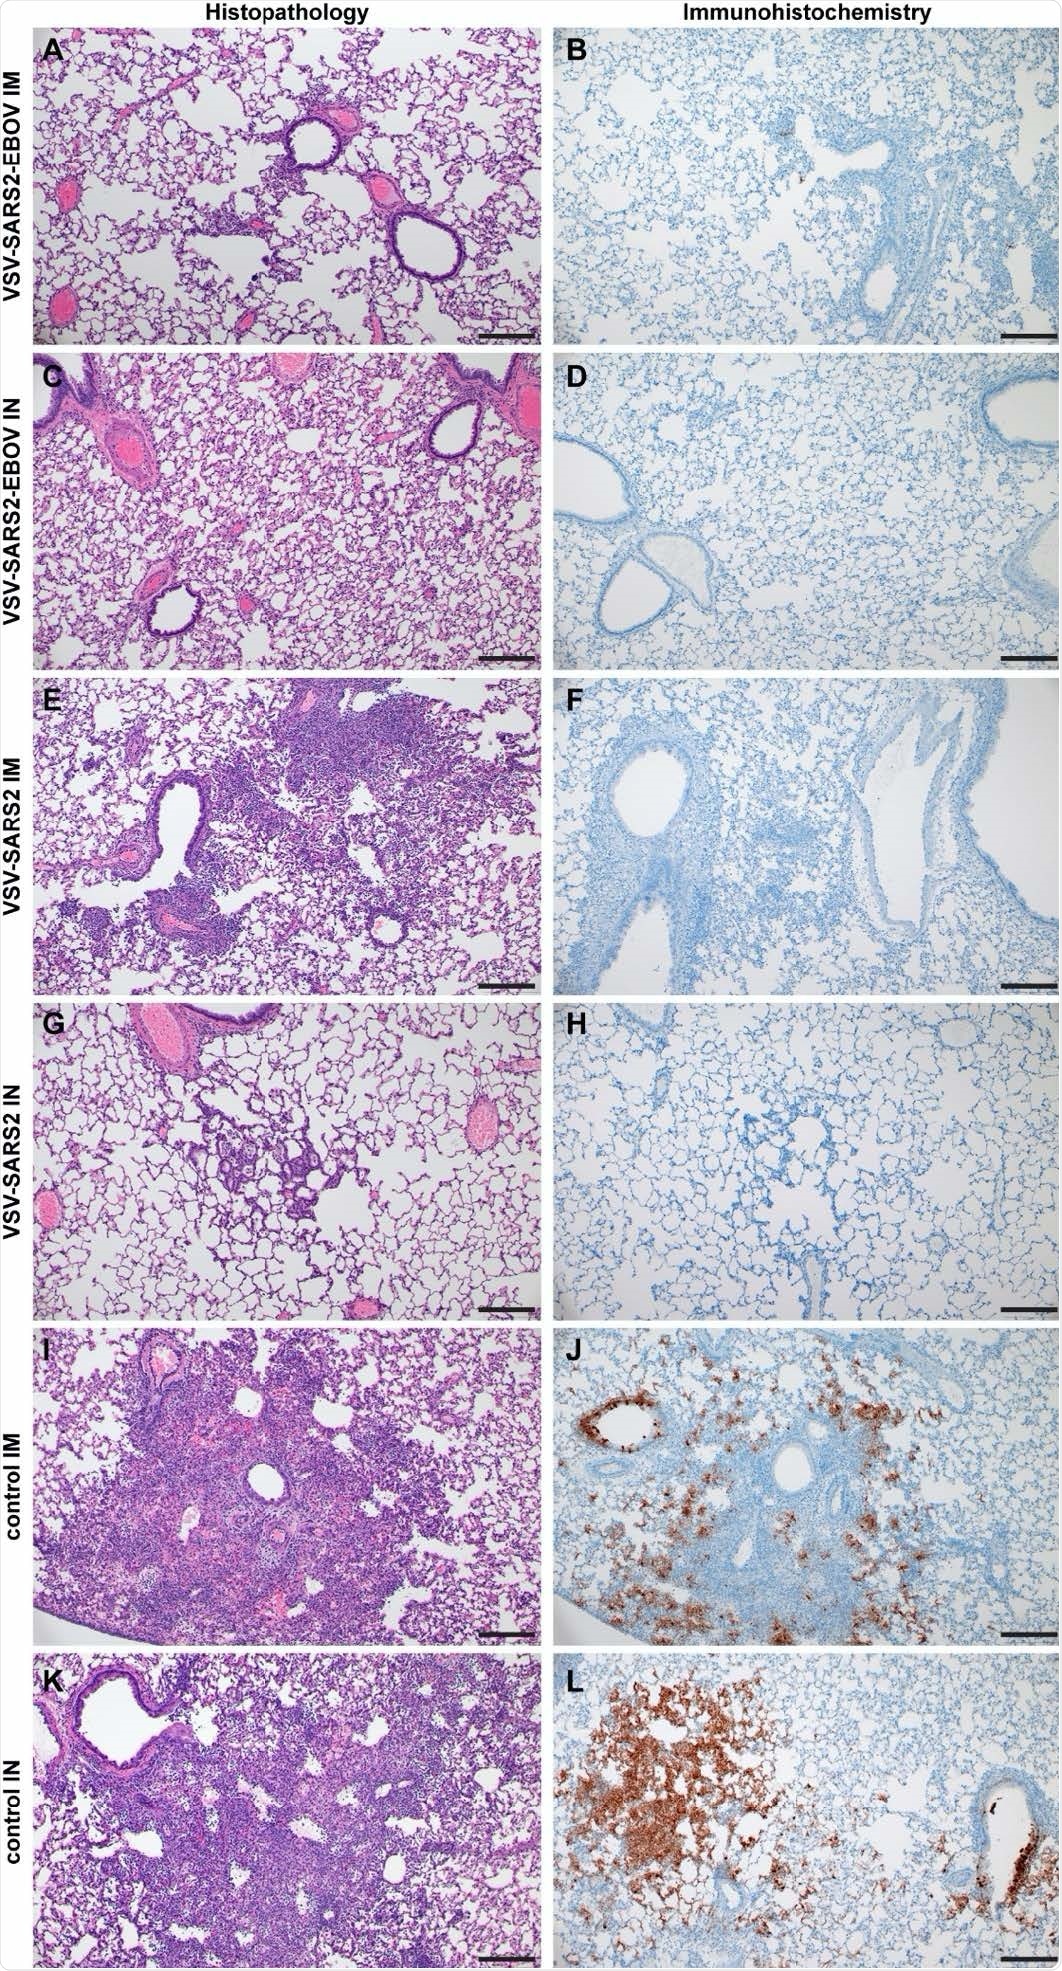 Histopathology and Immunohistochemistry of h 612 amster lungs with challenge 10 DPV. Hamsters were vaccinated 10 days prior to challenge with SARS-CoV-2 WA1. At 4 days after challenge lung samples were collected and stained with H&E or anti-SARS-CoV-2 nucleocapsid (N) antibody for IHC. (A) Rare foci of minimal to mild interstitial pneumonia with mild alveolar spillover. (B) Rare type I pneumocyte immunoreactivity. (C) Lack of notable pulmonary histopathology. (D) No immunoreactivity to SARS-CoV-2 N. (E) Focus of mild to moderate broncho-interstitial pneumonia with perivascular leukocyte cuffing. (F) Limited type I pneumocyte immunoreactivity. (G) Rare foci of minimal to mild interstitial pneumonia with type II pneumocyte hyperplasia. (H) No immunoreactivity to SARS-CoV-2 N. (I) Focus of moderate to severe bronchointerstitial pneumonia with disruption of pulmonary architecture by degenerate and non-degenerate neutrophils, macrophages and cellular debris accompanied with perivascular and pulmonary edema. (J) Abundant immunoreactivity to SARS-CoV-2 N in columnar epithelium of bronchioles, type I pneumocytes and alveolar macrophages. (K) Moderate broncho-interstitial pneumonia with influx of moderate to numerous leukocytes and limited pulmonary edema. (L) Abundant immunoreactivity to SARS-CoV-2 N in bronchiolar epithelium, type I and II pneumocytes and within cellular debris. (200x, bar = 50 μM).